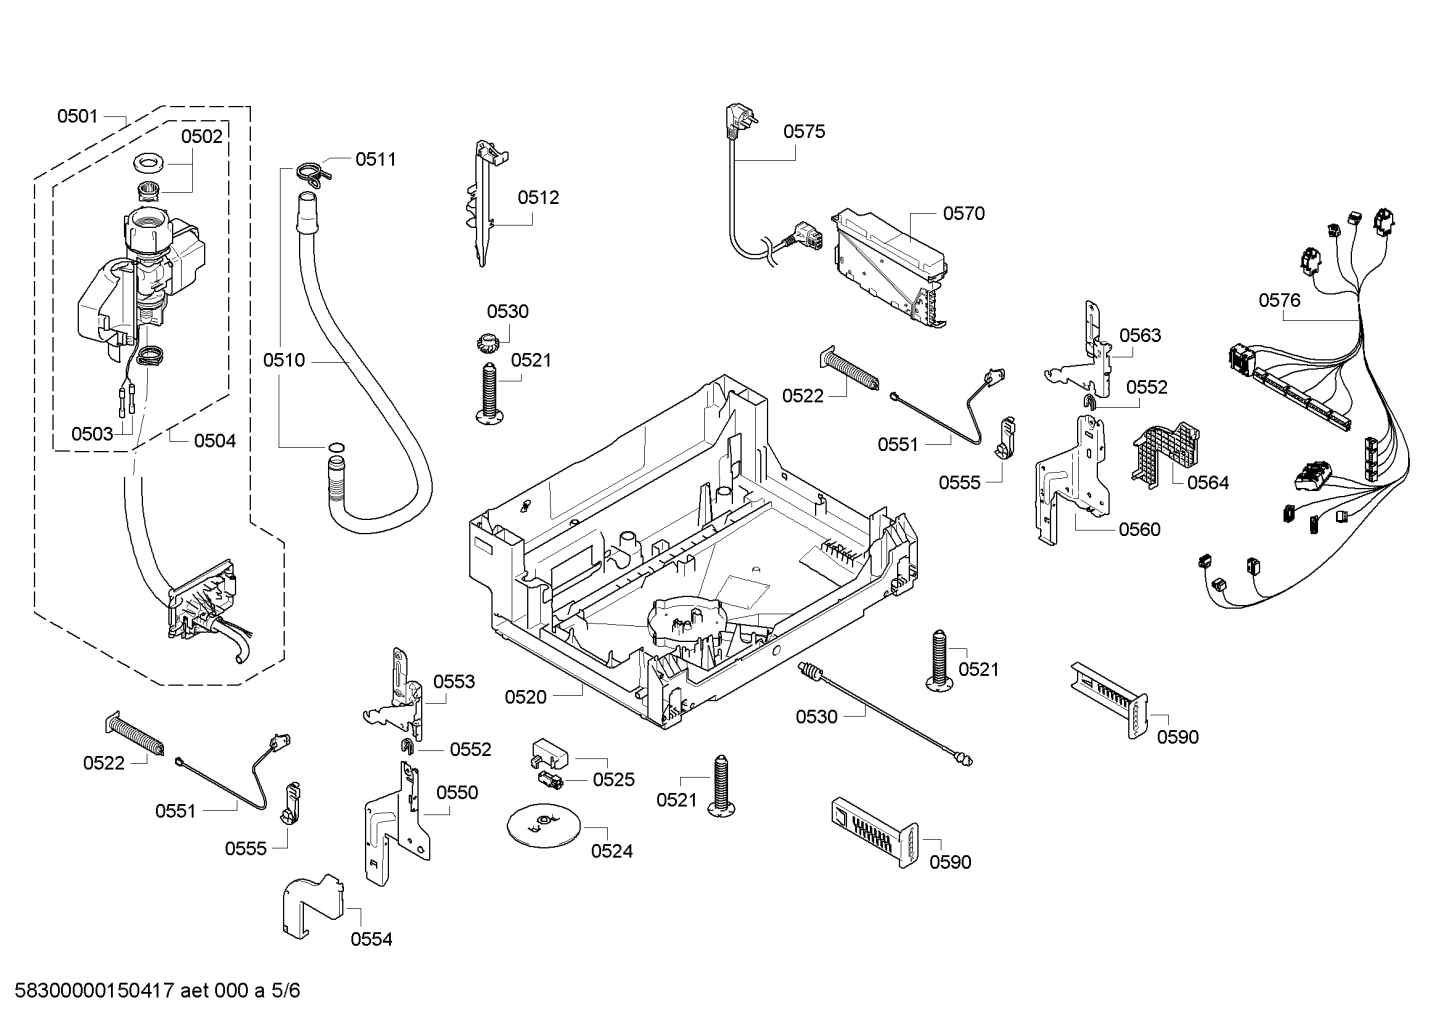 drawing_link_5_device_1591499